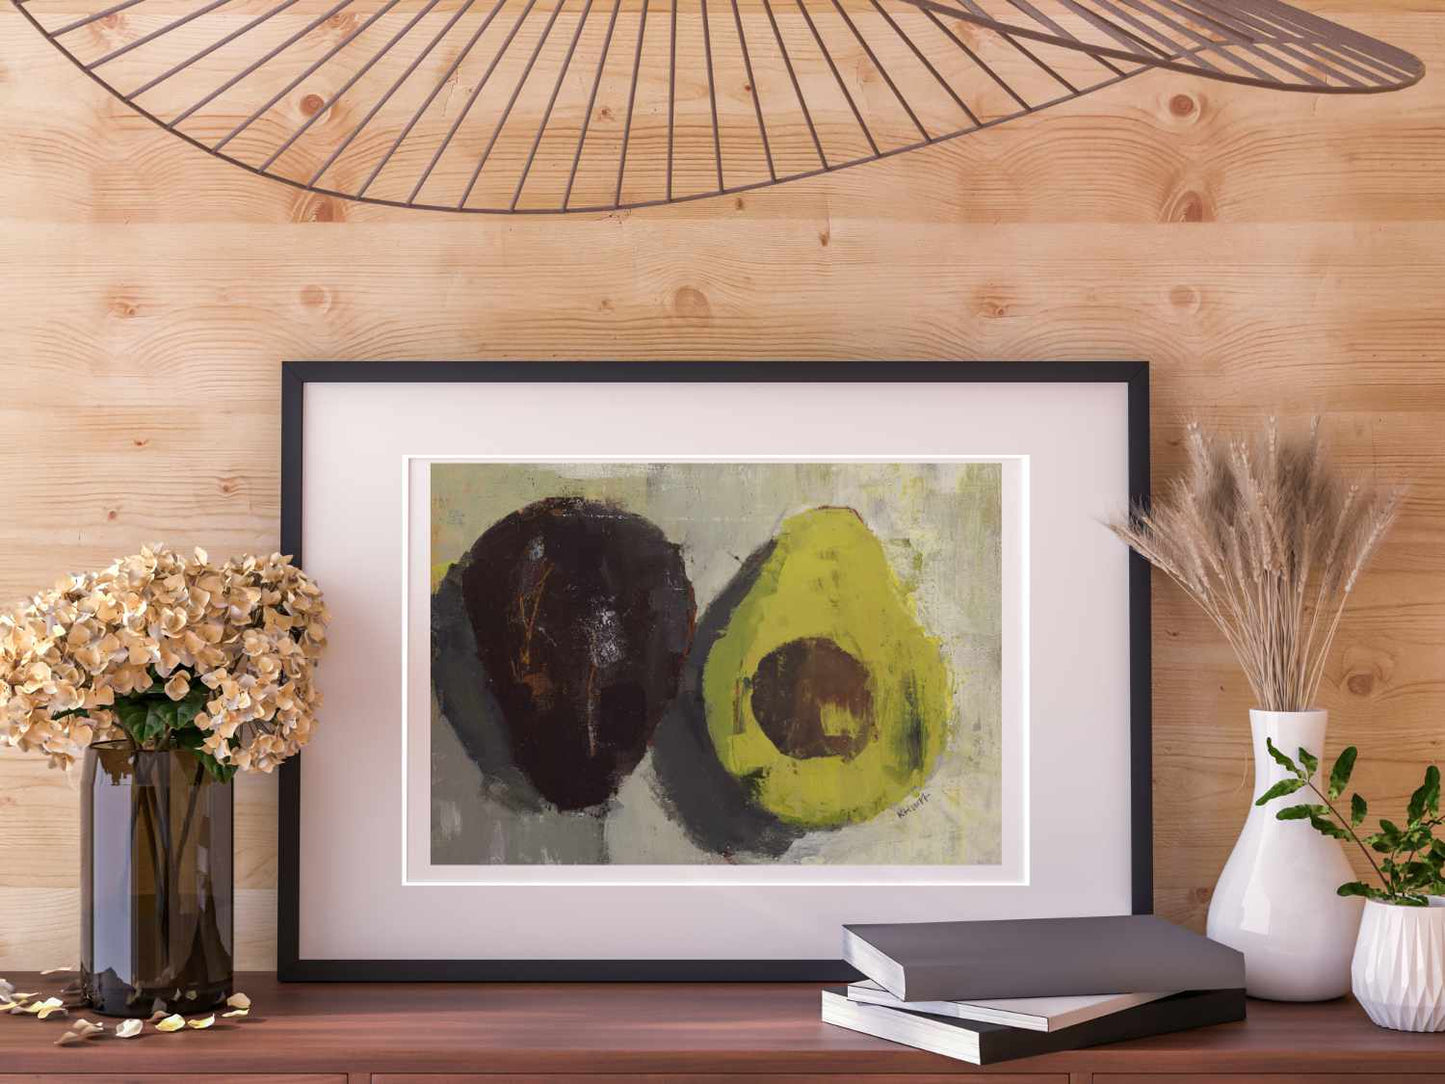 Avocado fine art print shown in black frame with wooden panelling behind and brown flowers